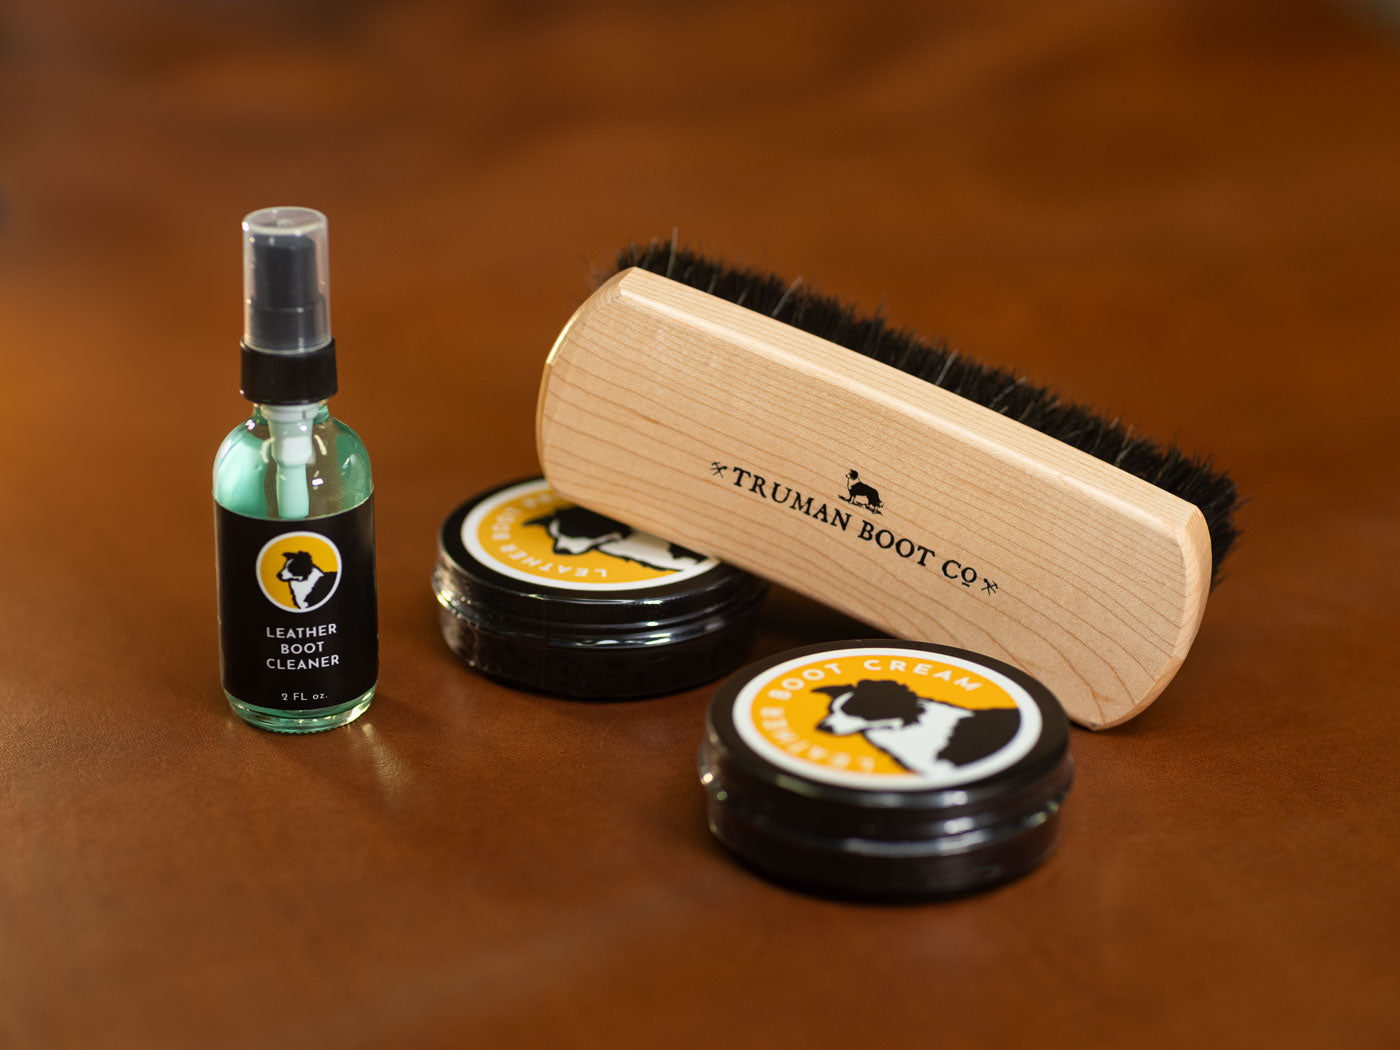 group of truman leather care items including leather cleaner boot protector and horsehair brush